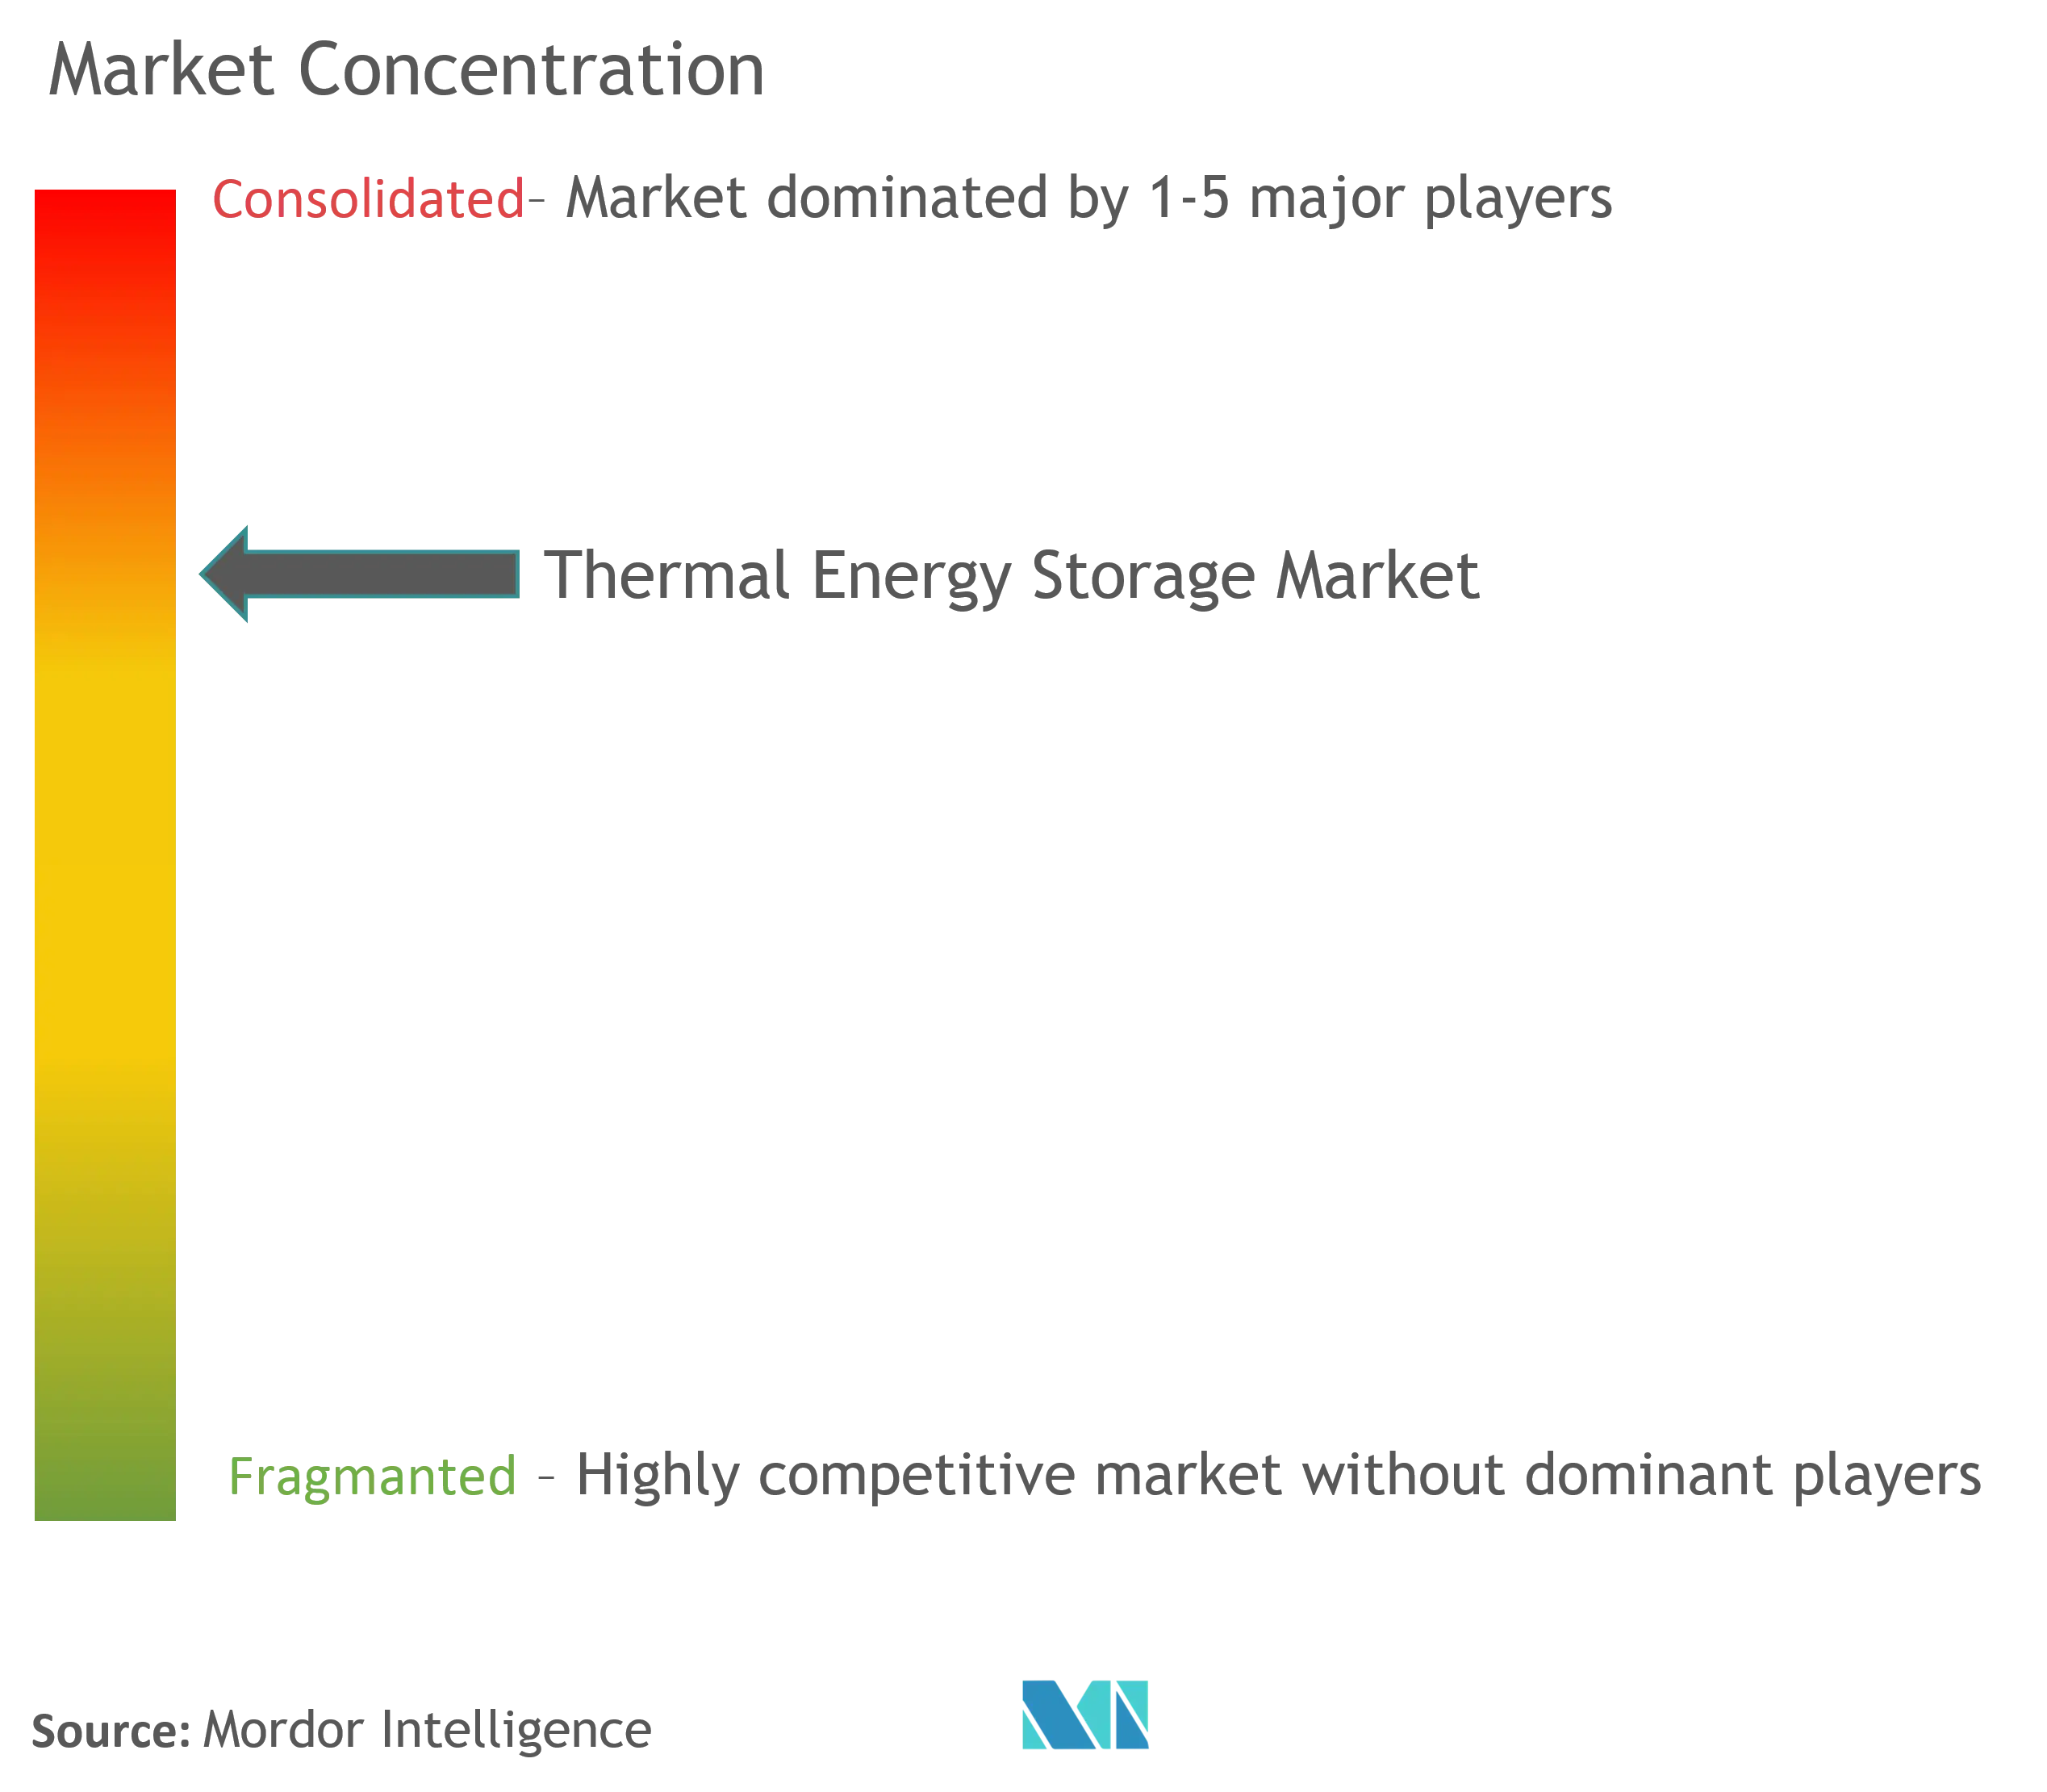 Thermal Energy Storage Market Concentration